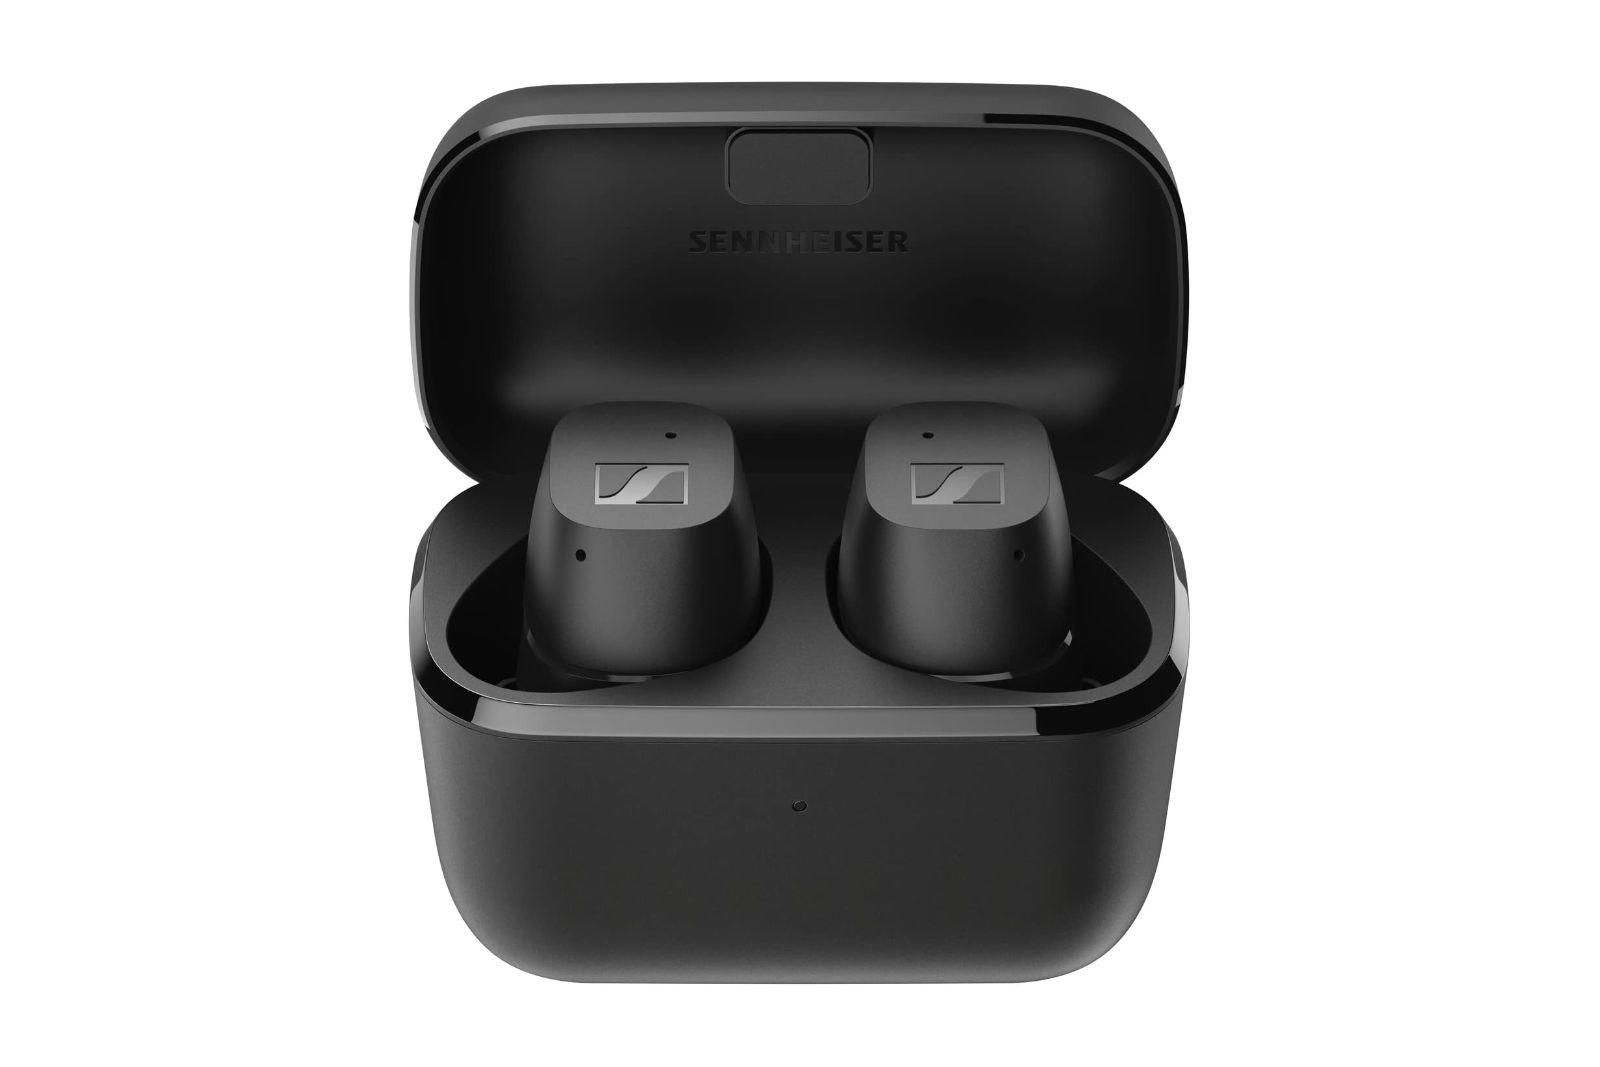 Black rectangular earbuds sitting in a charging case.